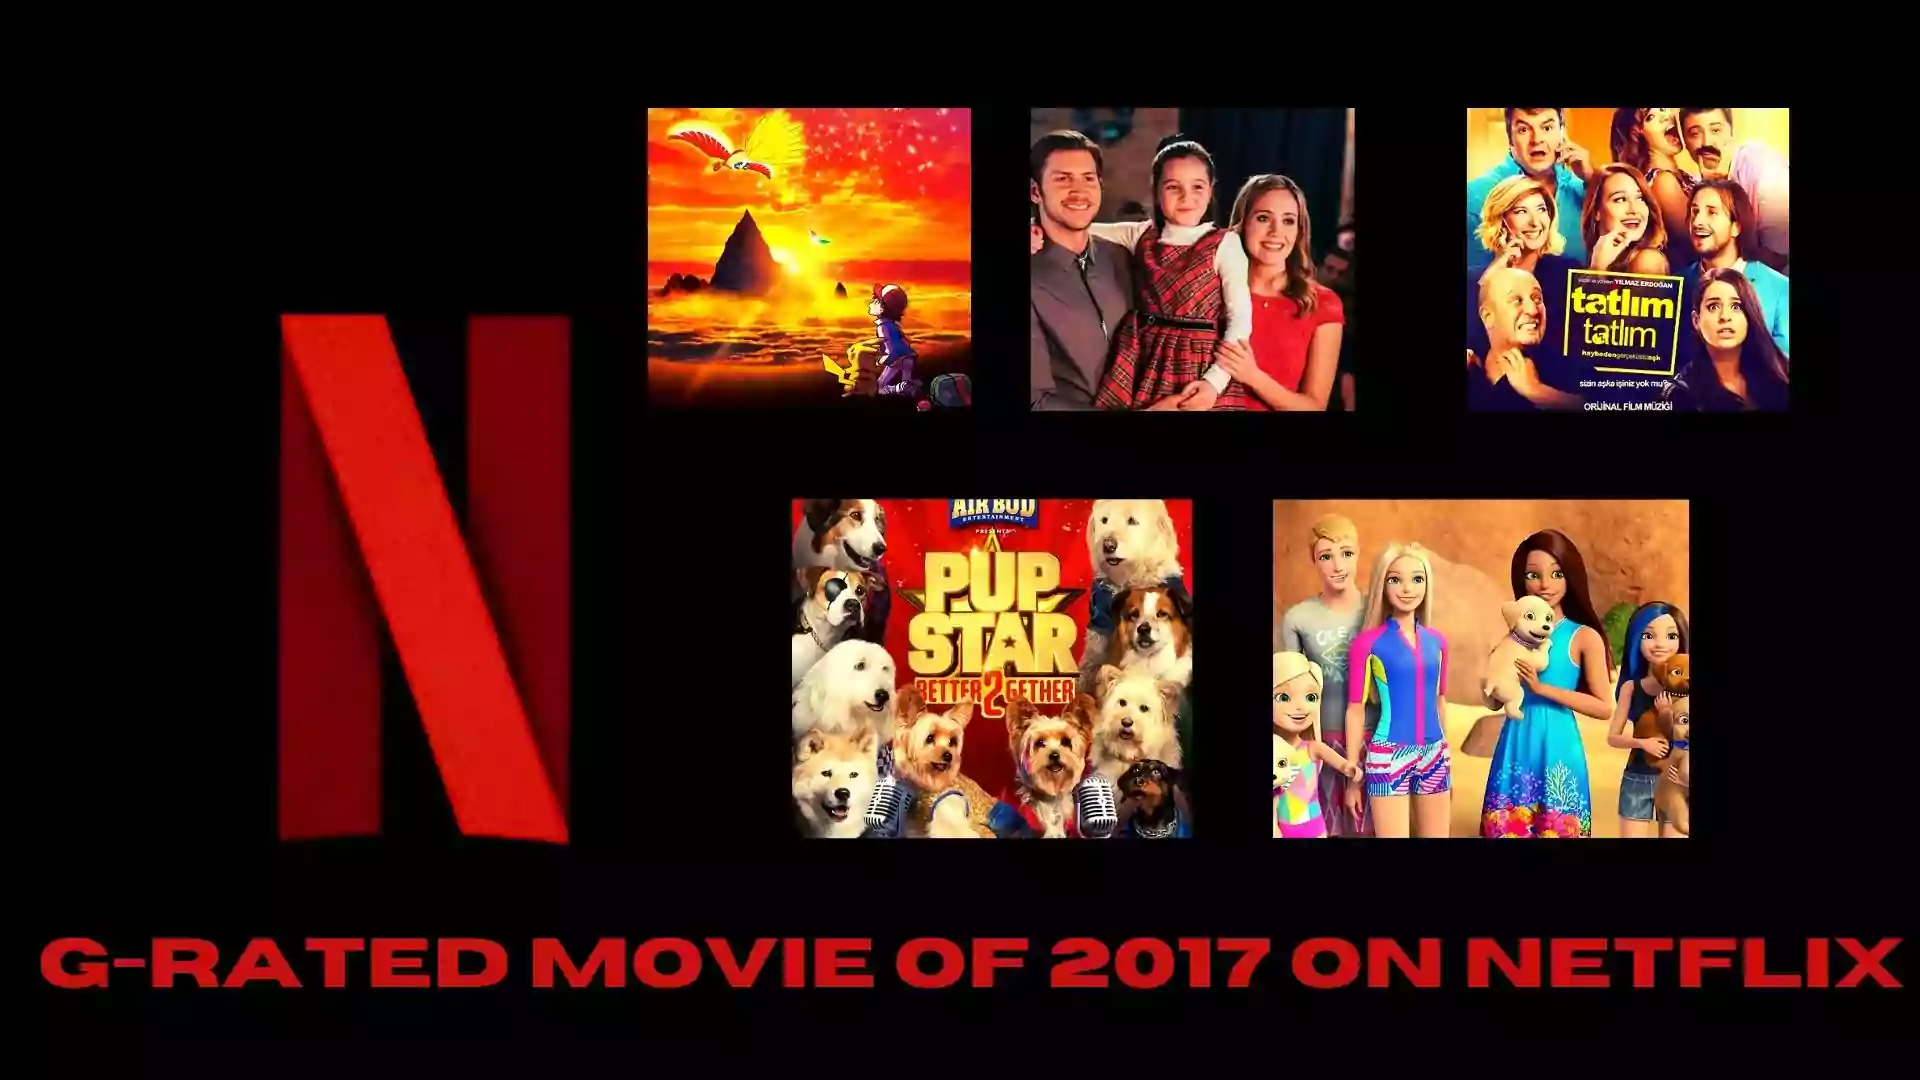 G-Rated Movie of 2017 on Netflix